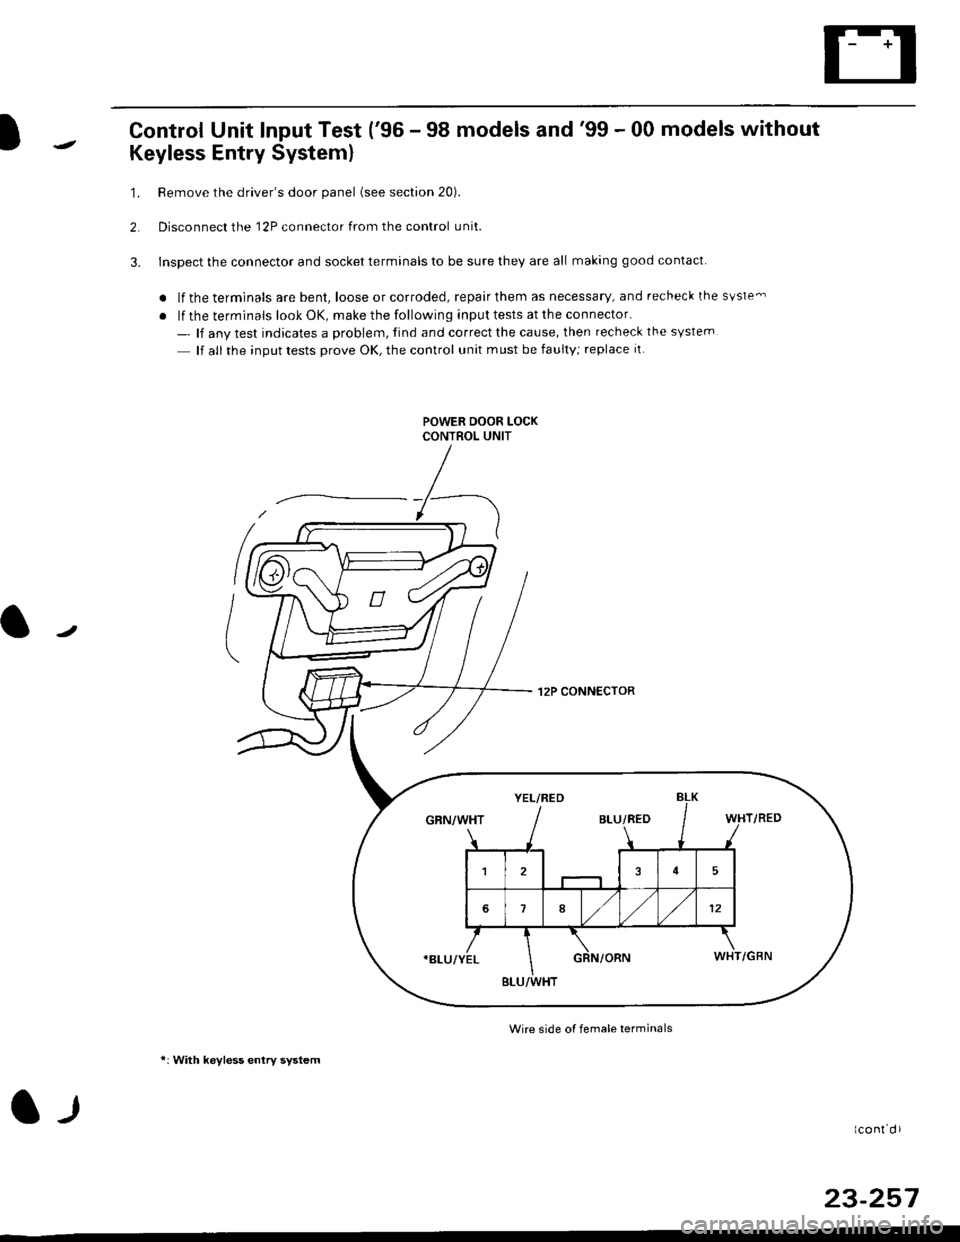 HONDA CIVIC 1996 6.G Workshop Manual Control Unit Input Test (96 - 98 models and99 - 00 models without
Keyless Entry System)
1. Remove the drivers door panel (see section 20).
2. Disconnect the 12P connector from the control unit.
3. 